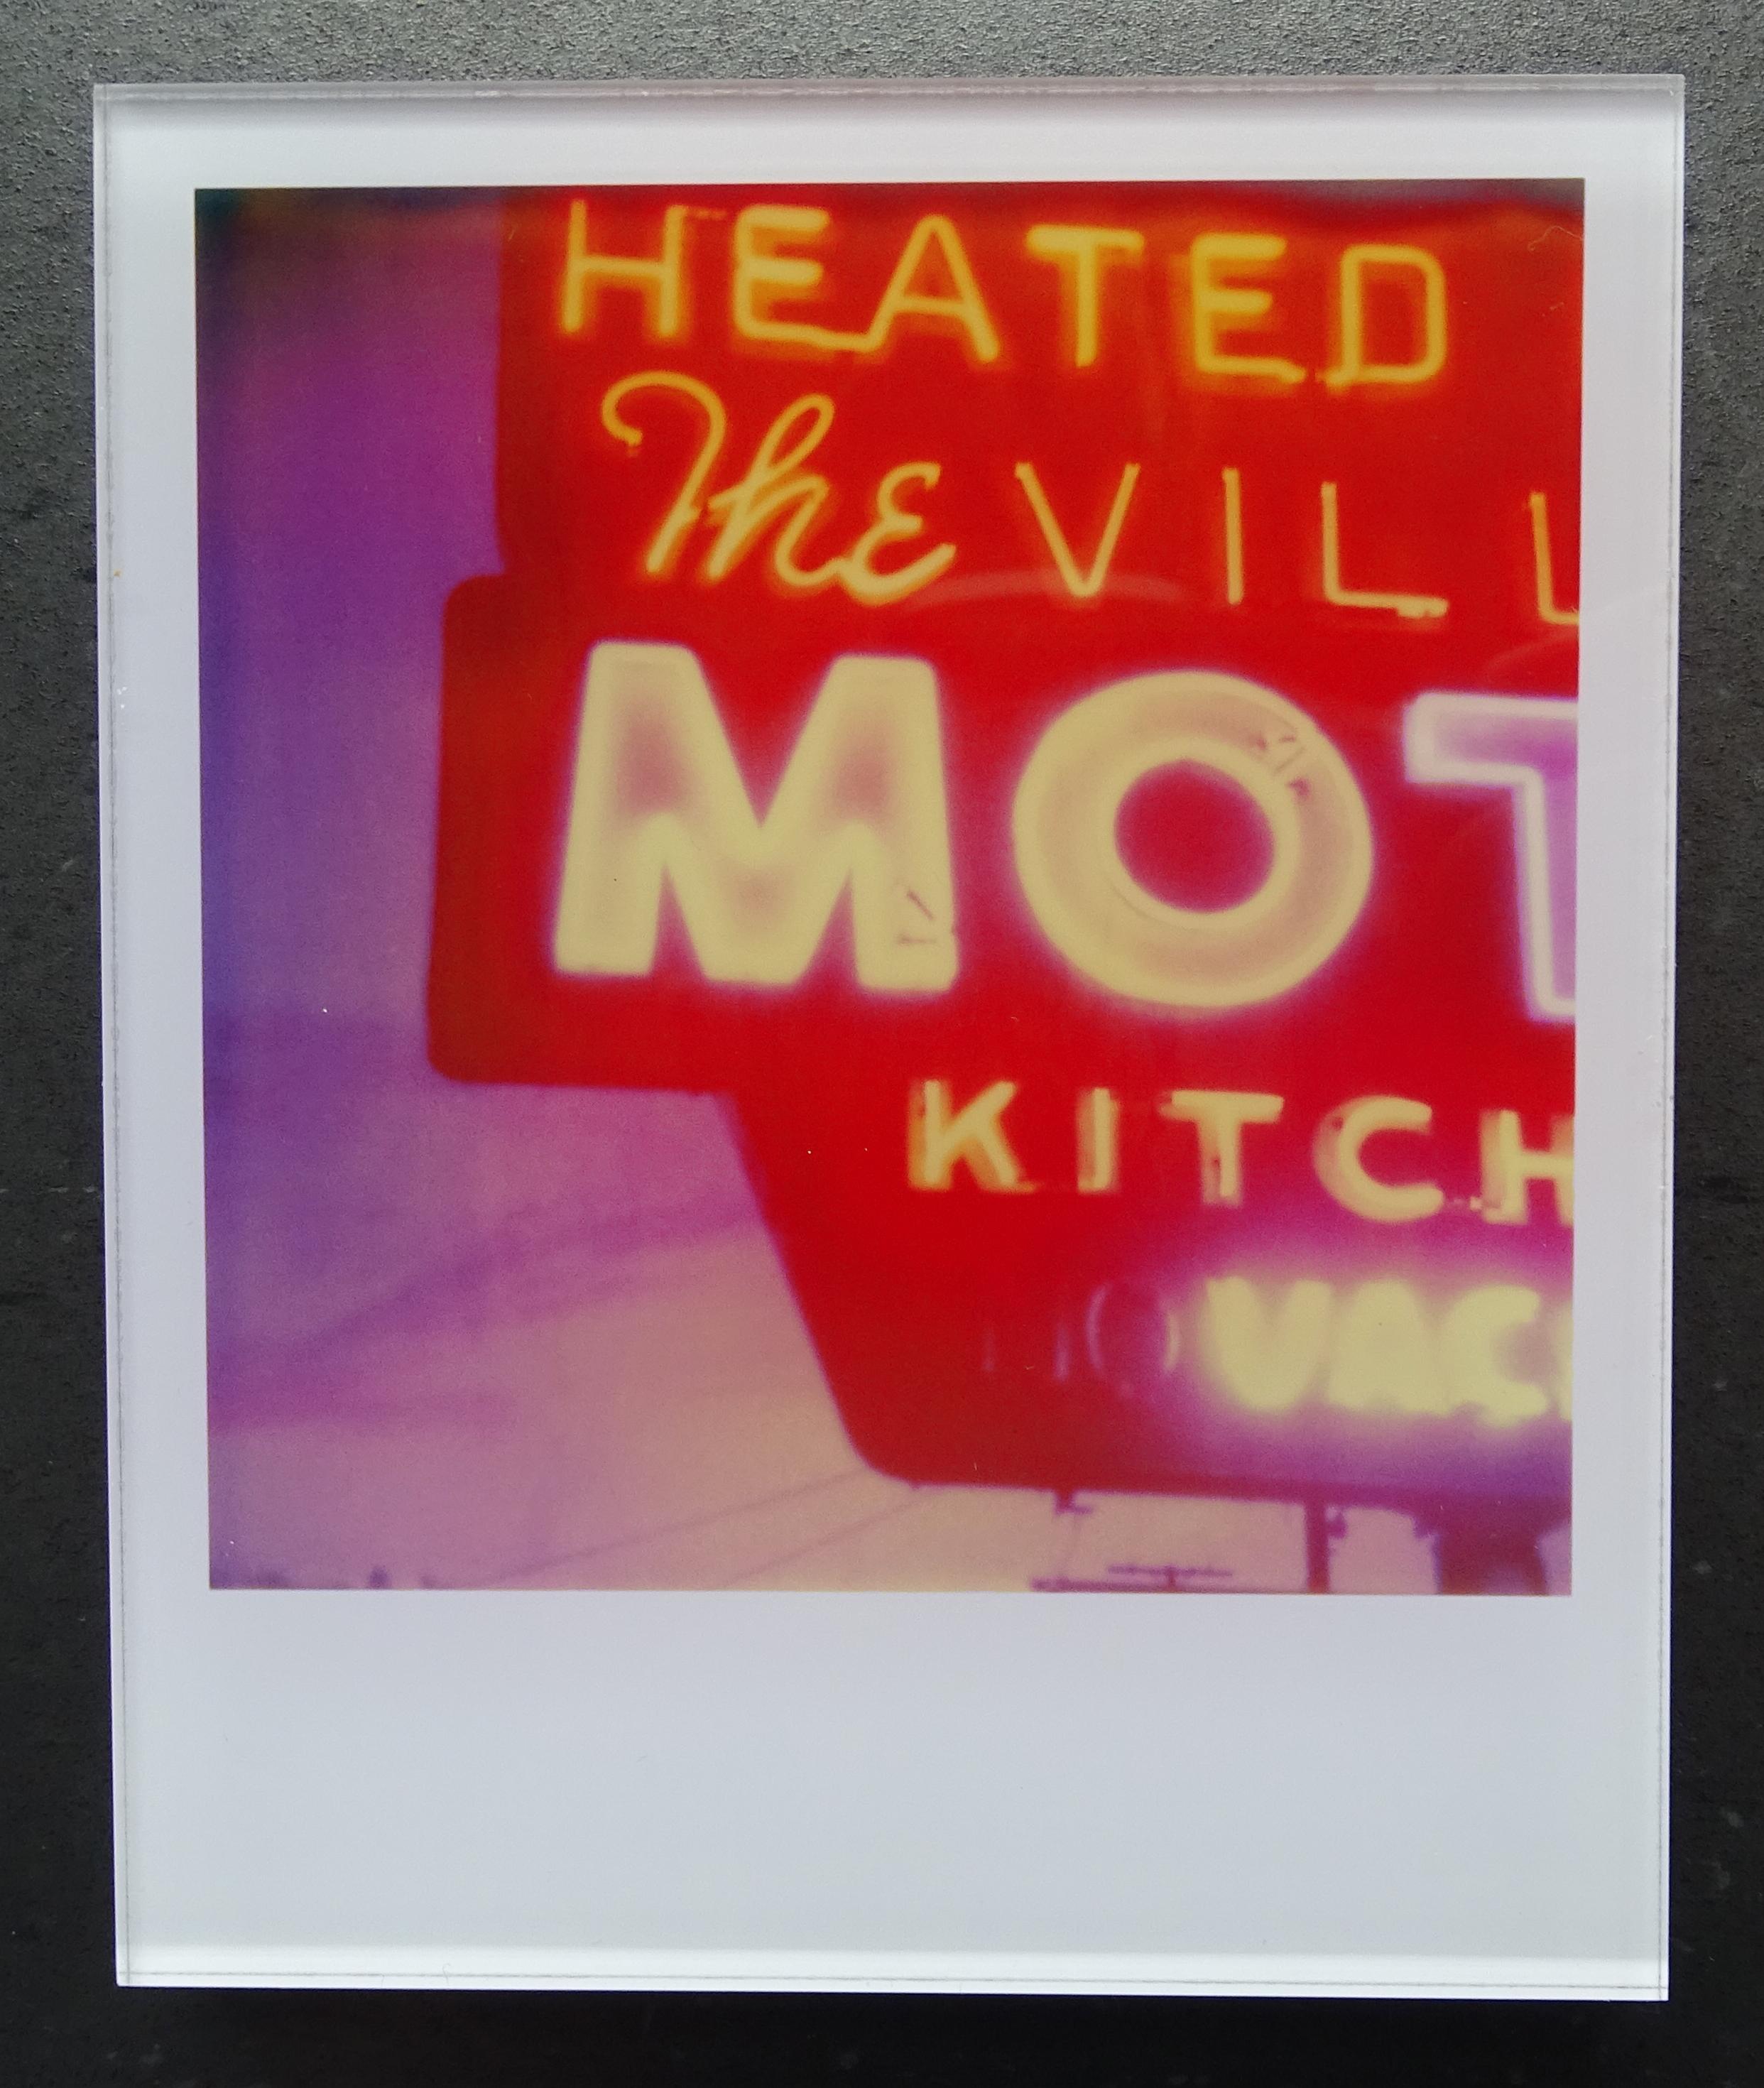 Stefanie Schneider's Minis
Village Motel Sunset (The last Picture Show), 2009

Signed and signature brand on verso.
Lambda digital Color Photographs based on a Polaroid.
Sandwiched in between Plexiglass (thickness 0.7cm)

Polaroid sized open